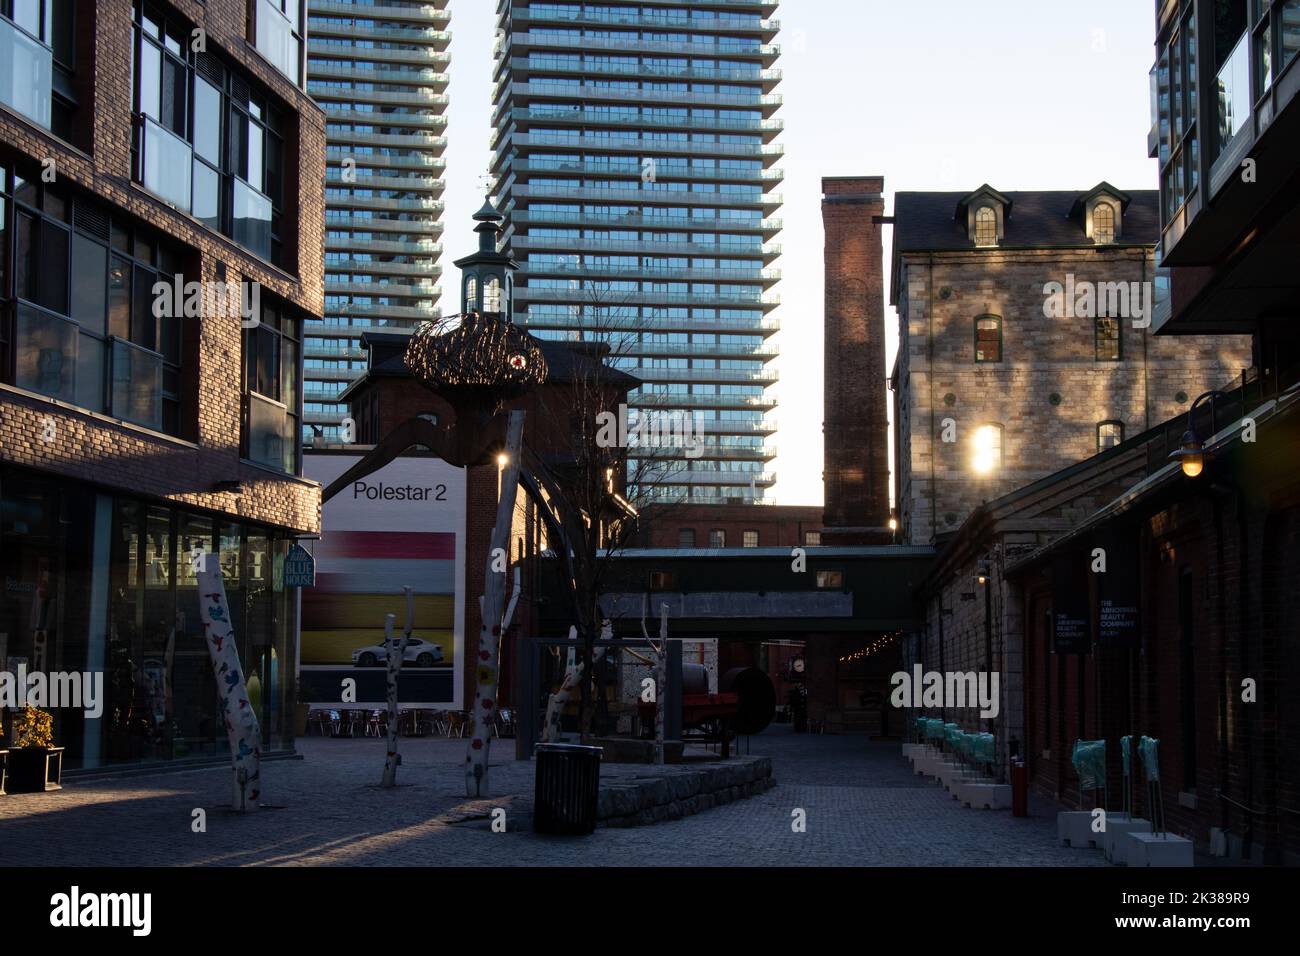 The Toronto Distillery District is seen in the early morning as the sun shines; an advertisement for the Polestar 2 electric vehicle on a building. Stock Photo